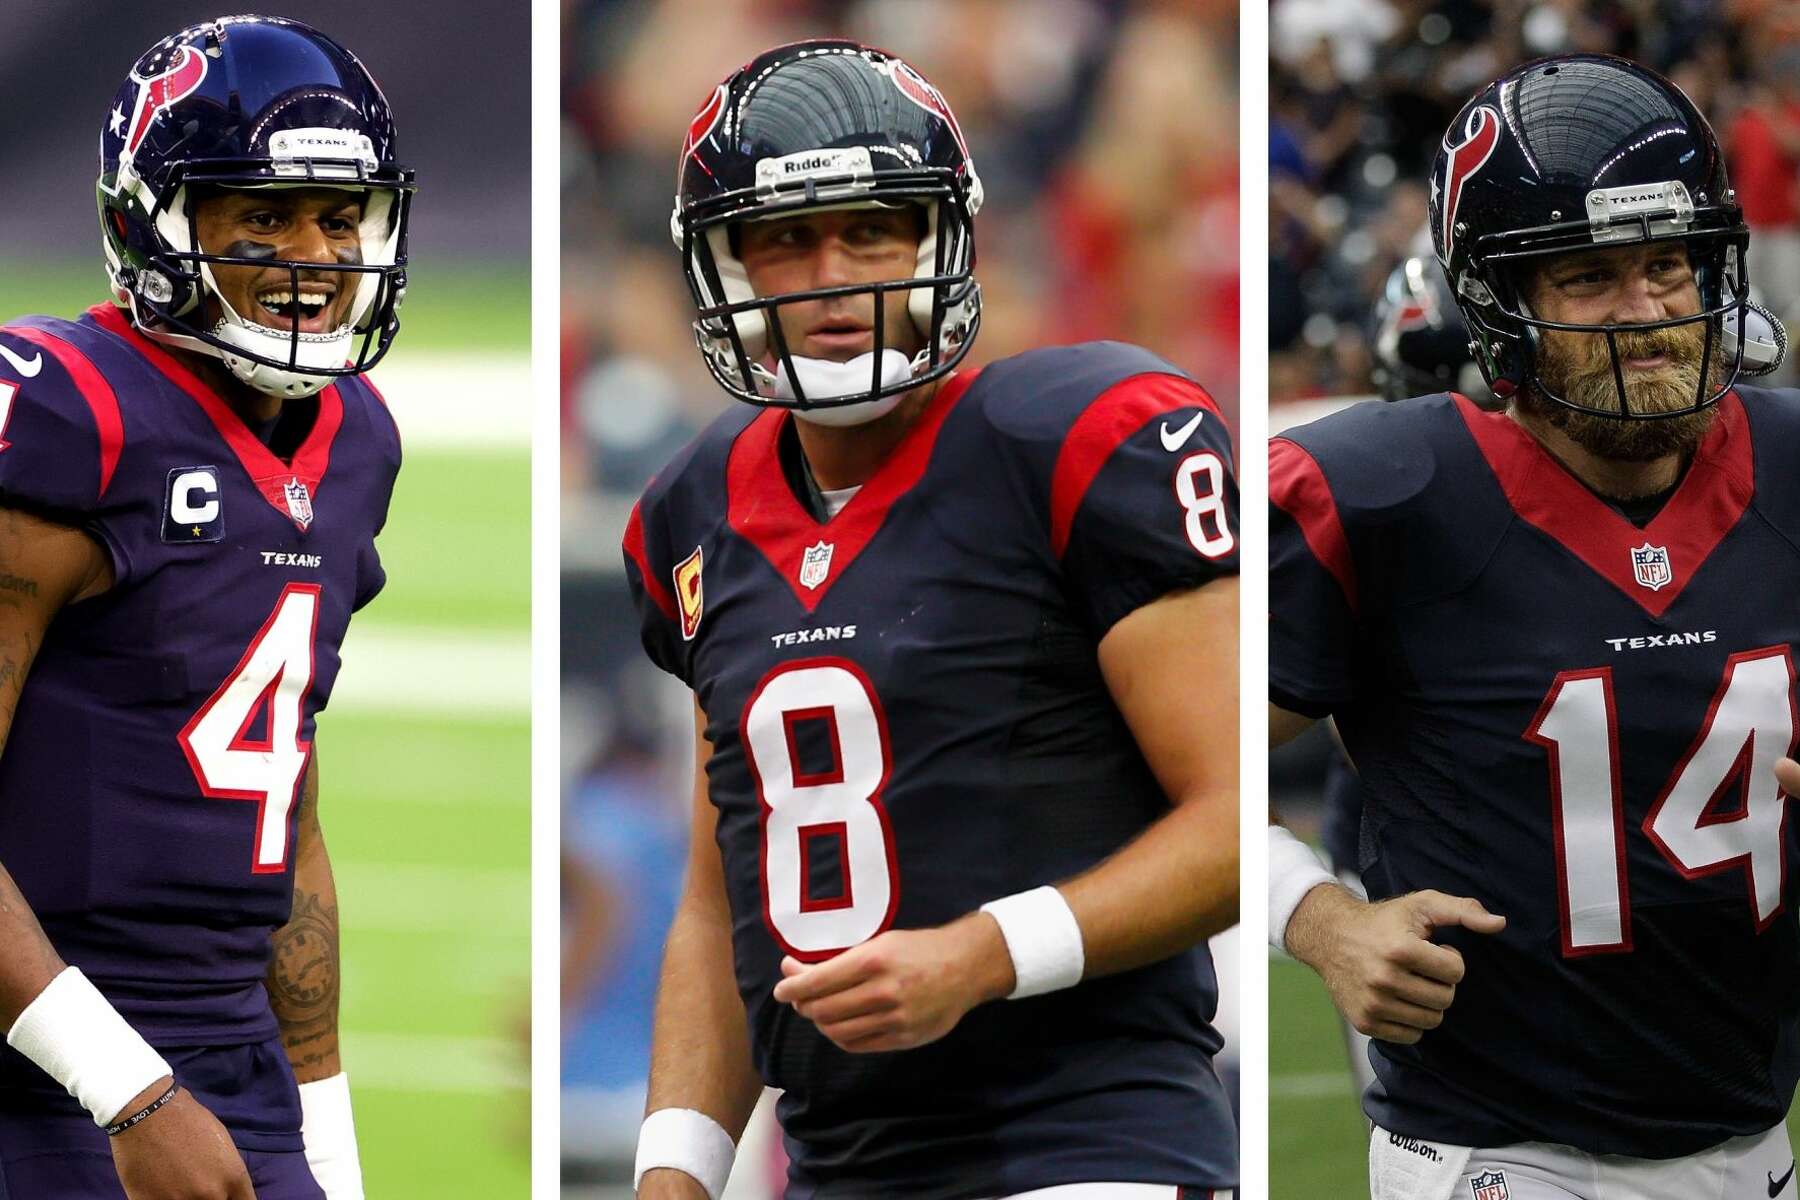 The Texans have used 17 different starting quarterbacks. We ranked them all.